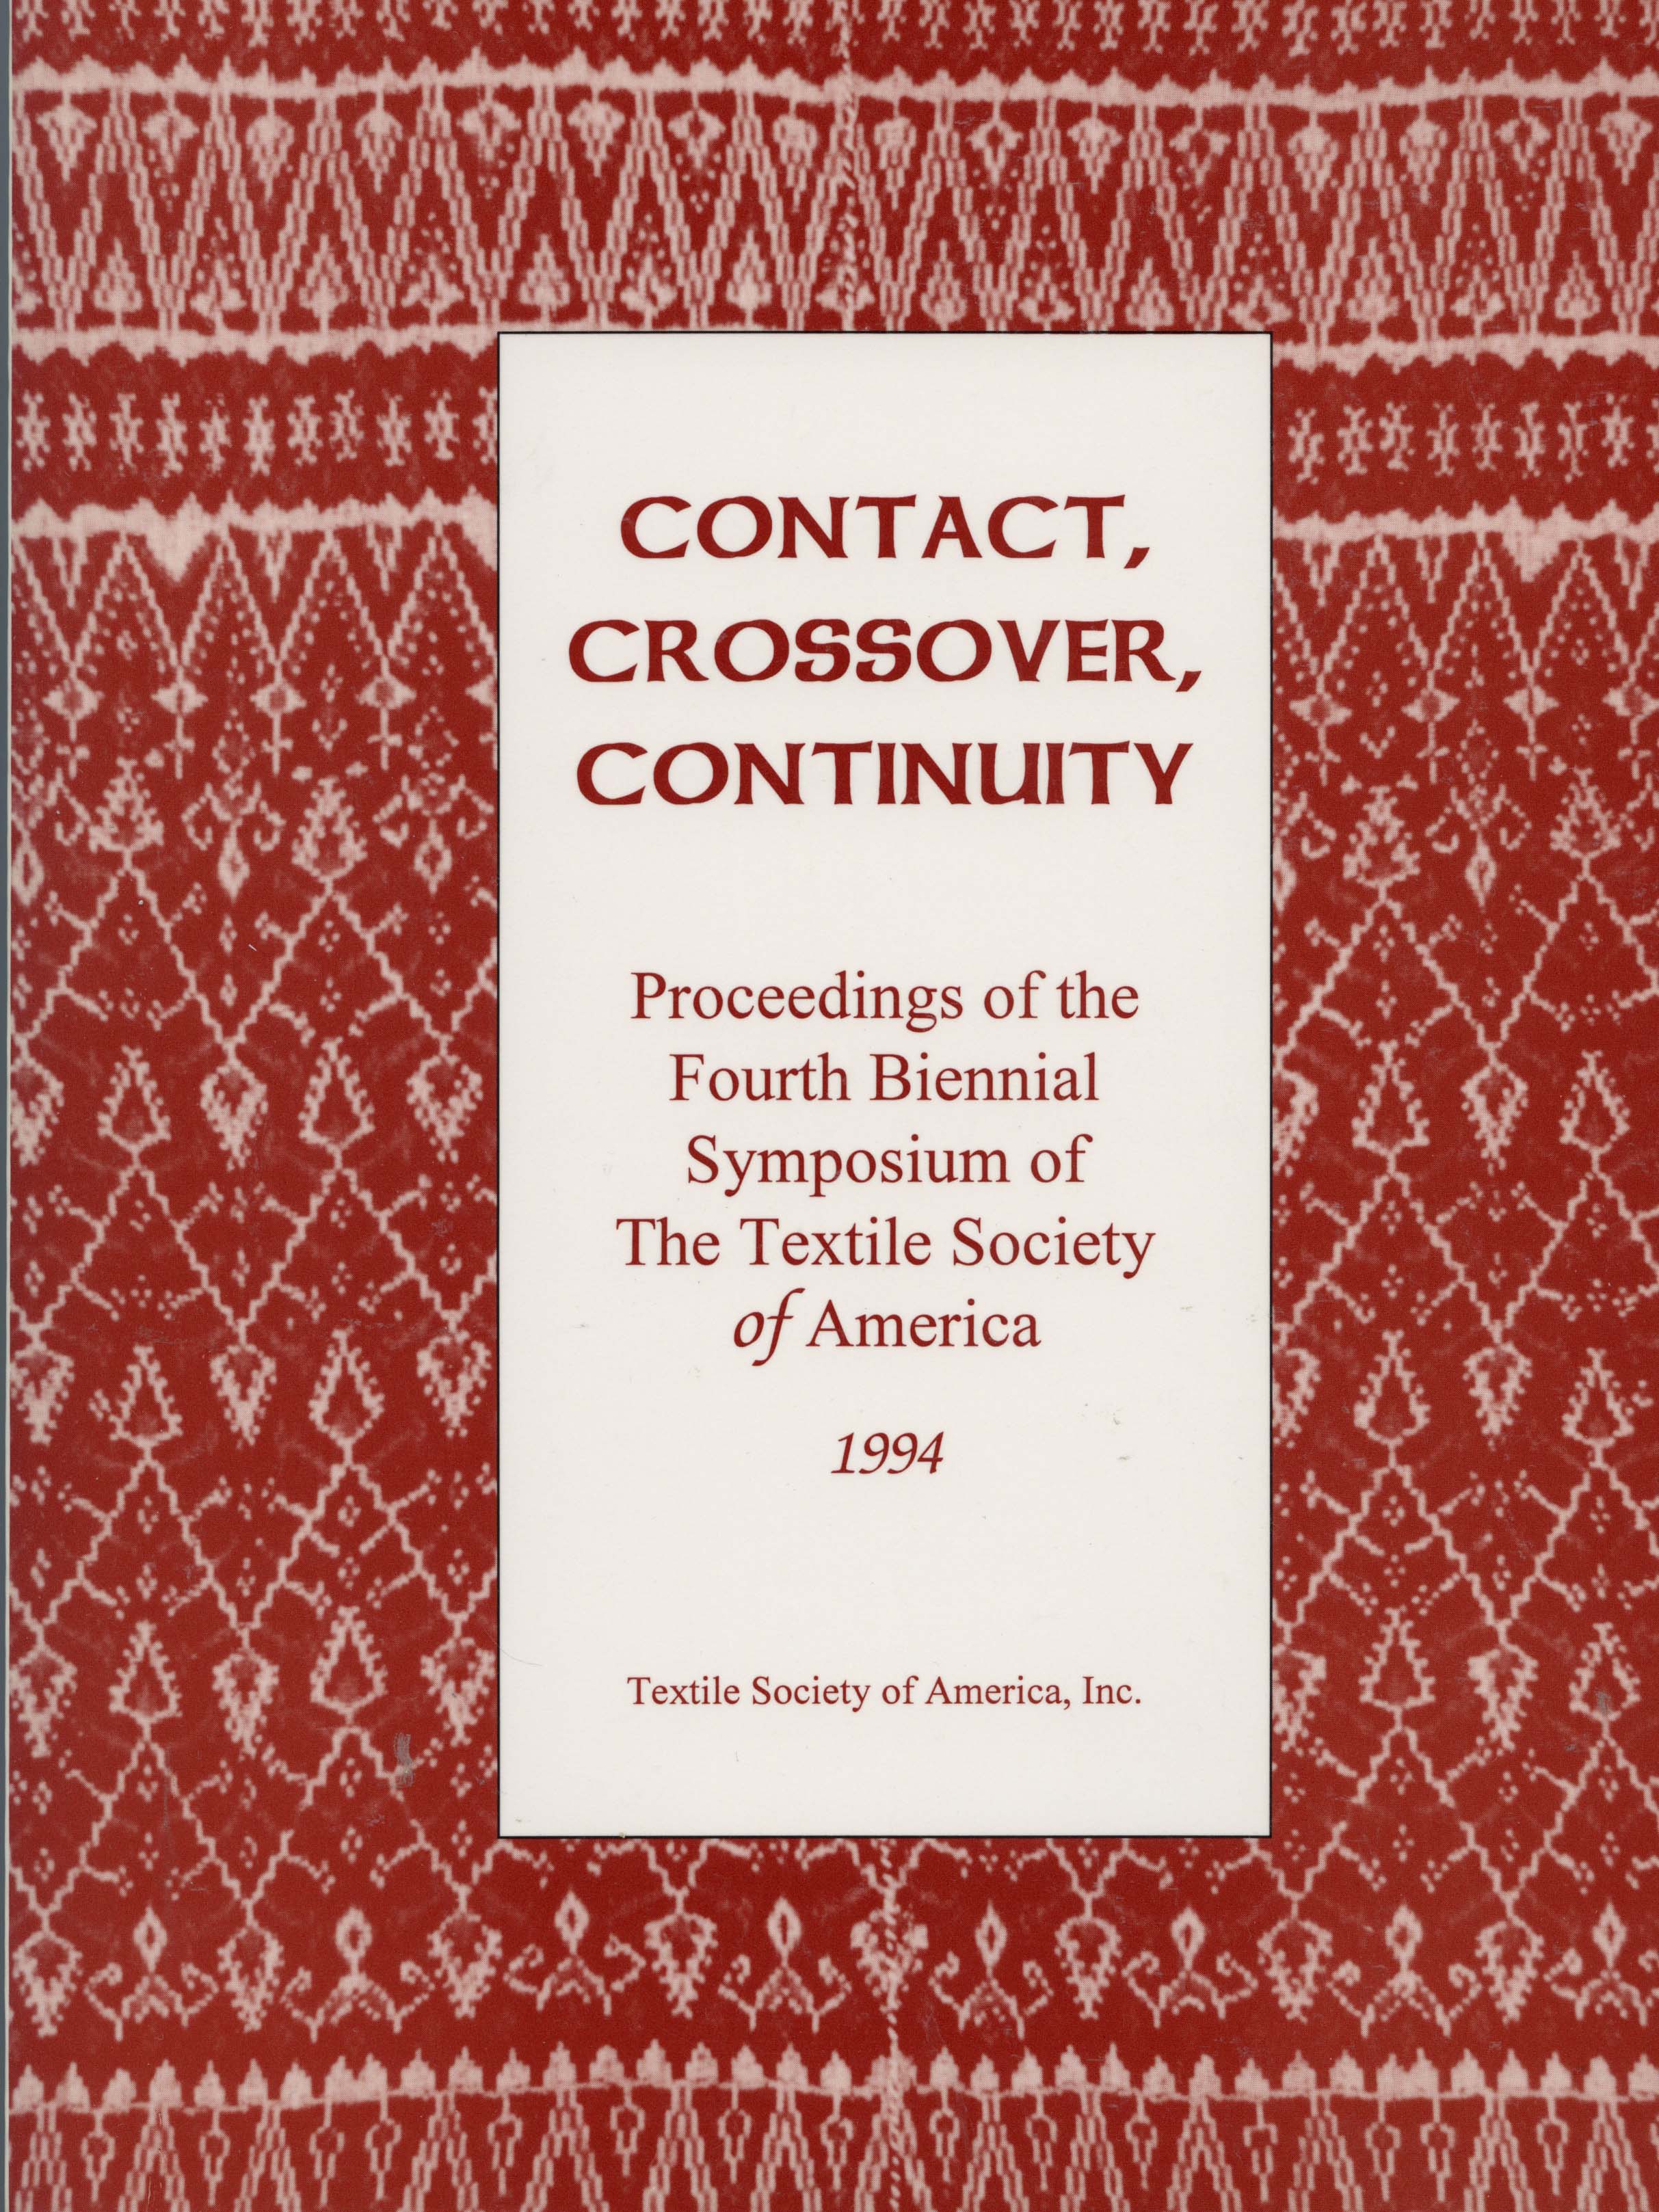 Contact, Crossover, Continuity. Proceedings of the Fourth Biennial Symposium of the Textile Society of America 1994